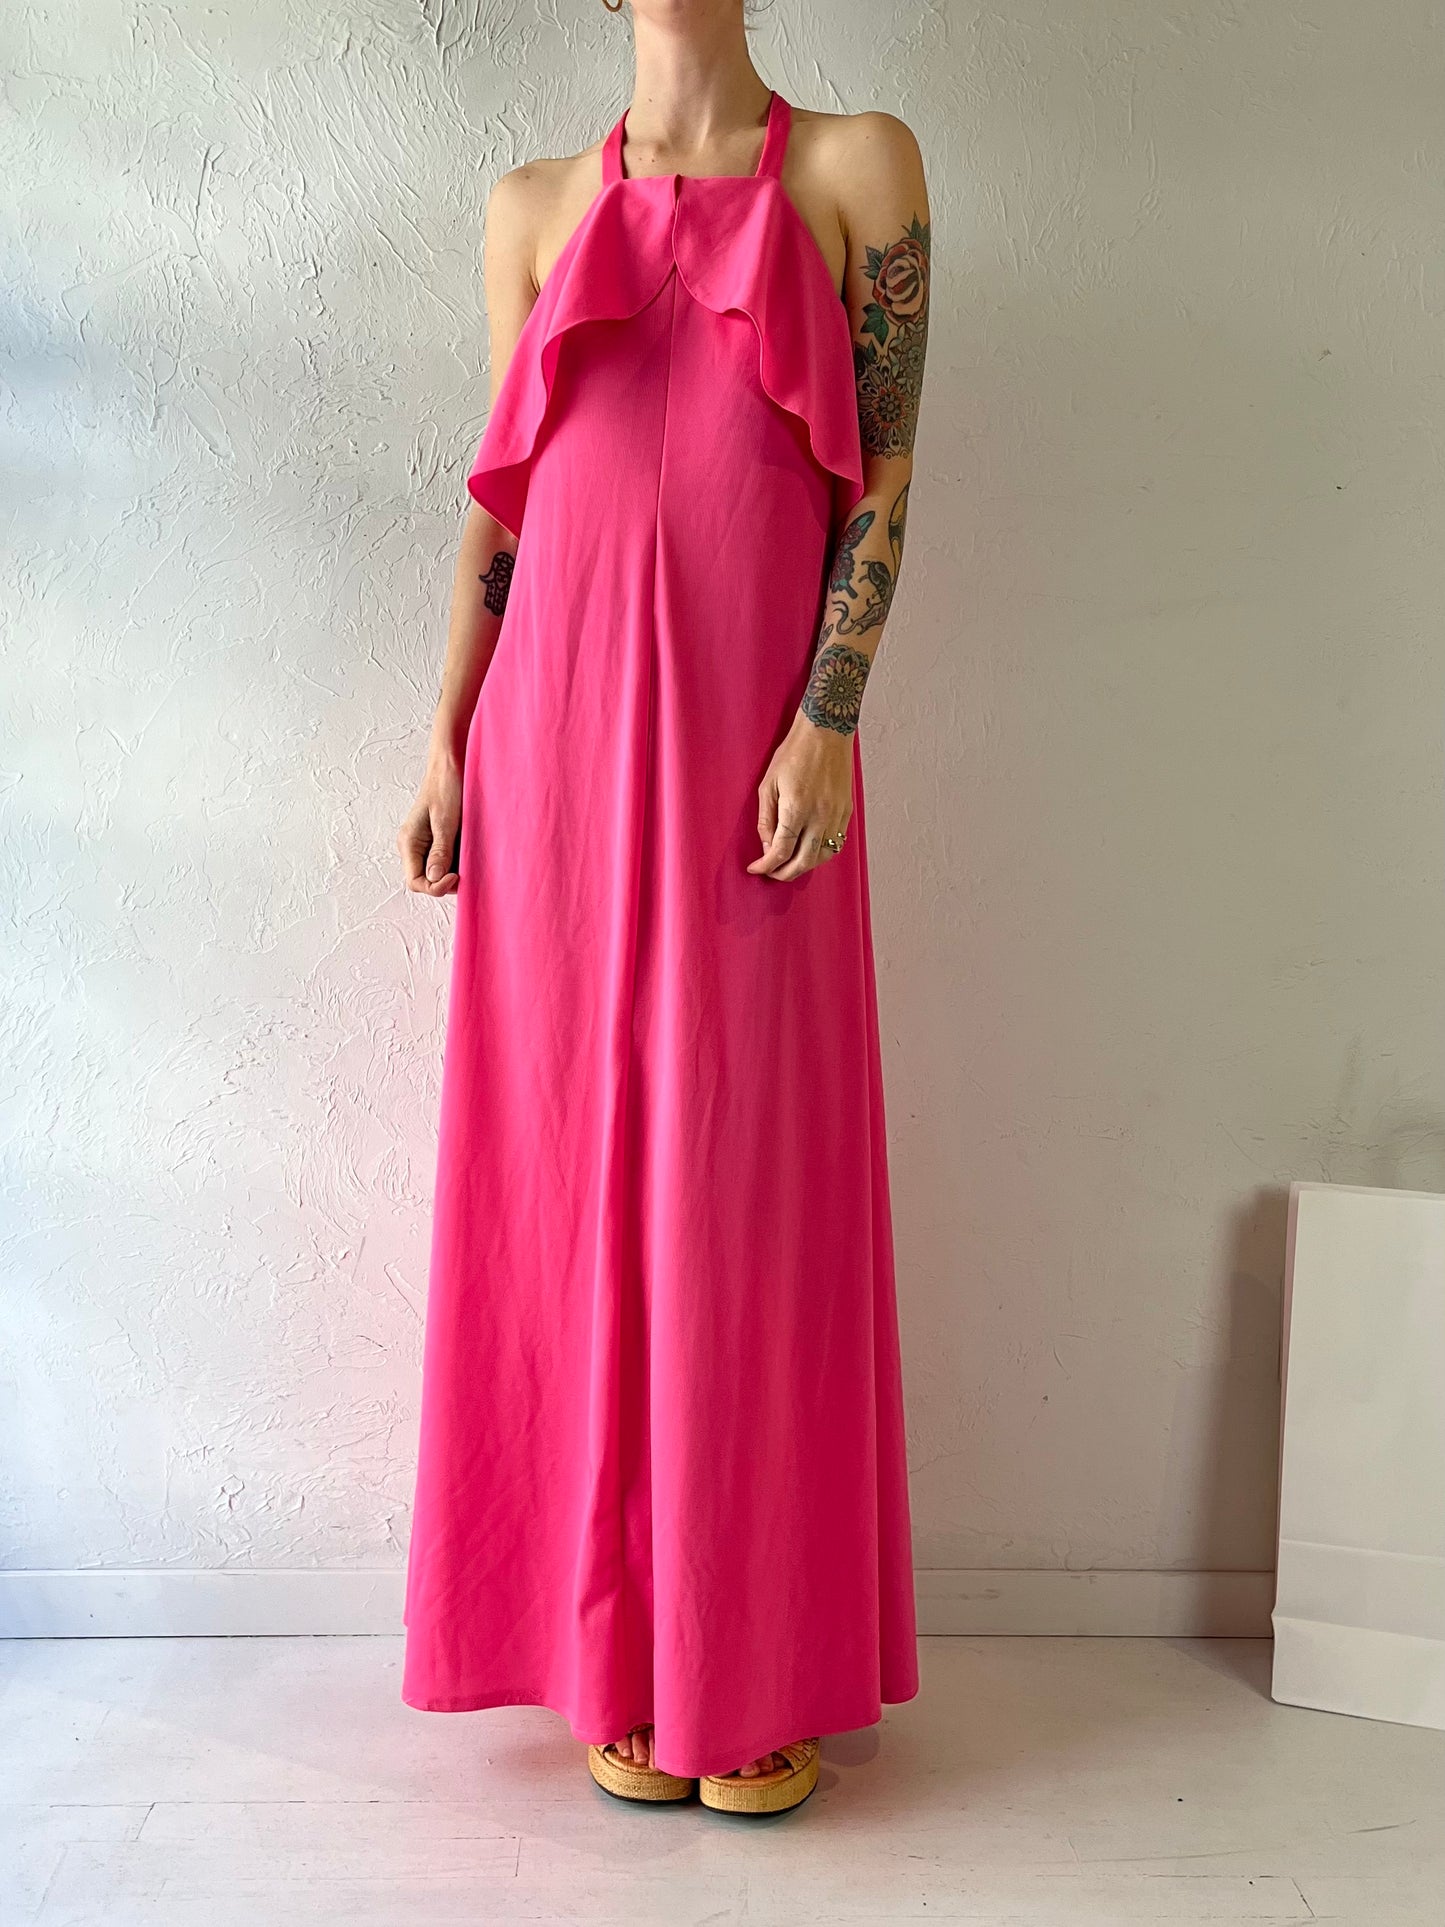 70s 'Gilmar' Pink Backless Dress / Union Made / Small